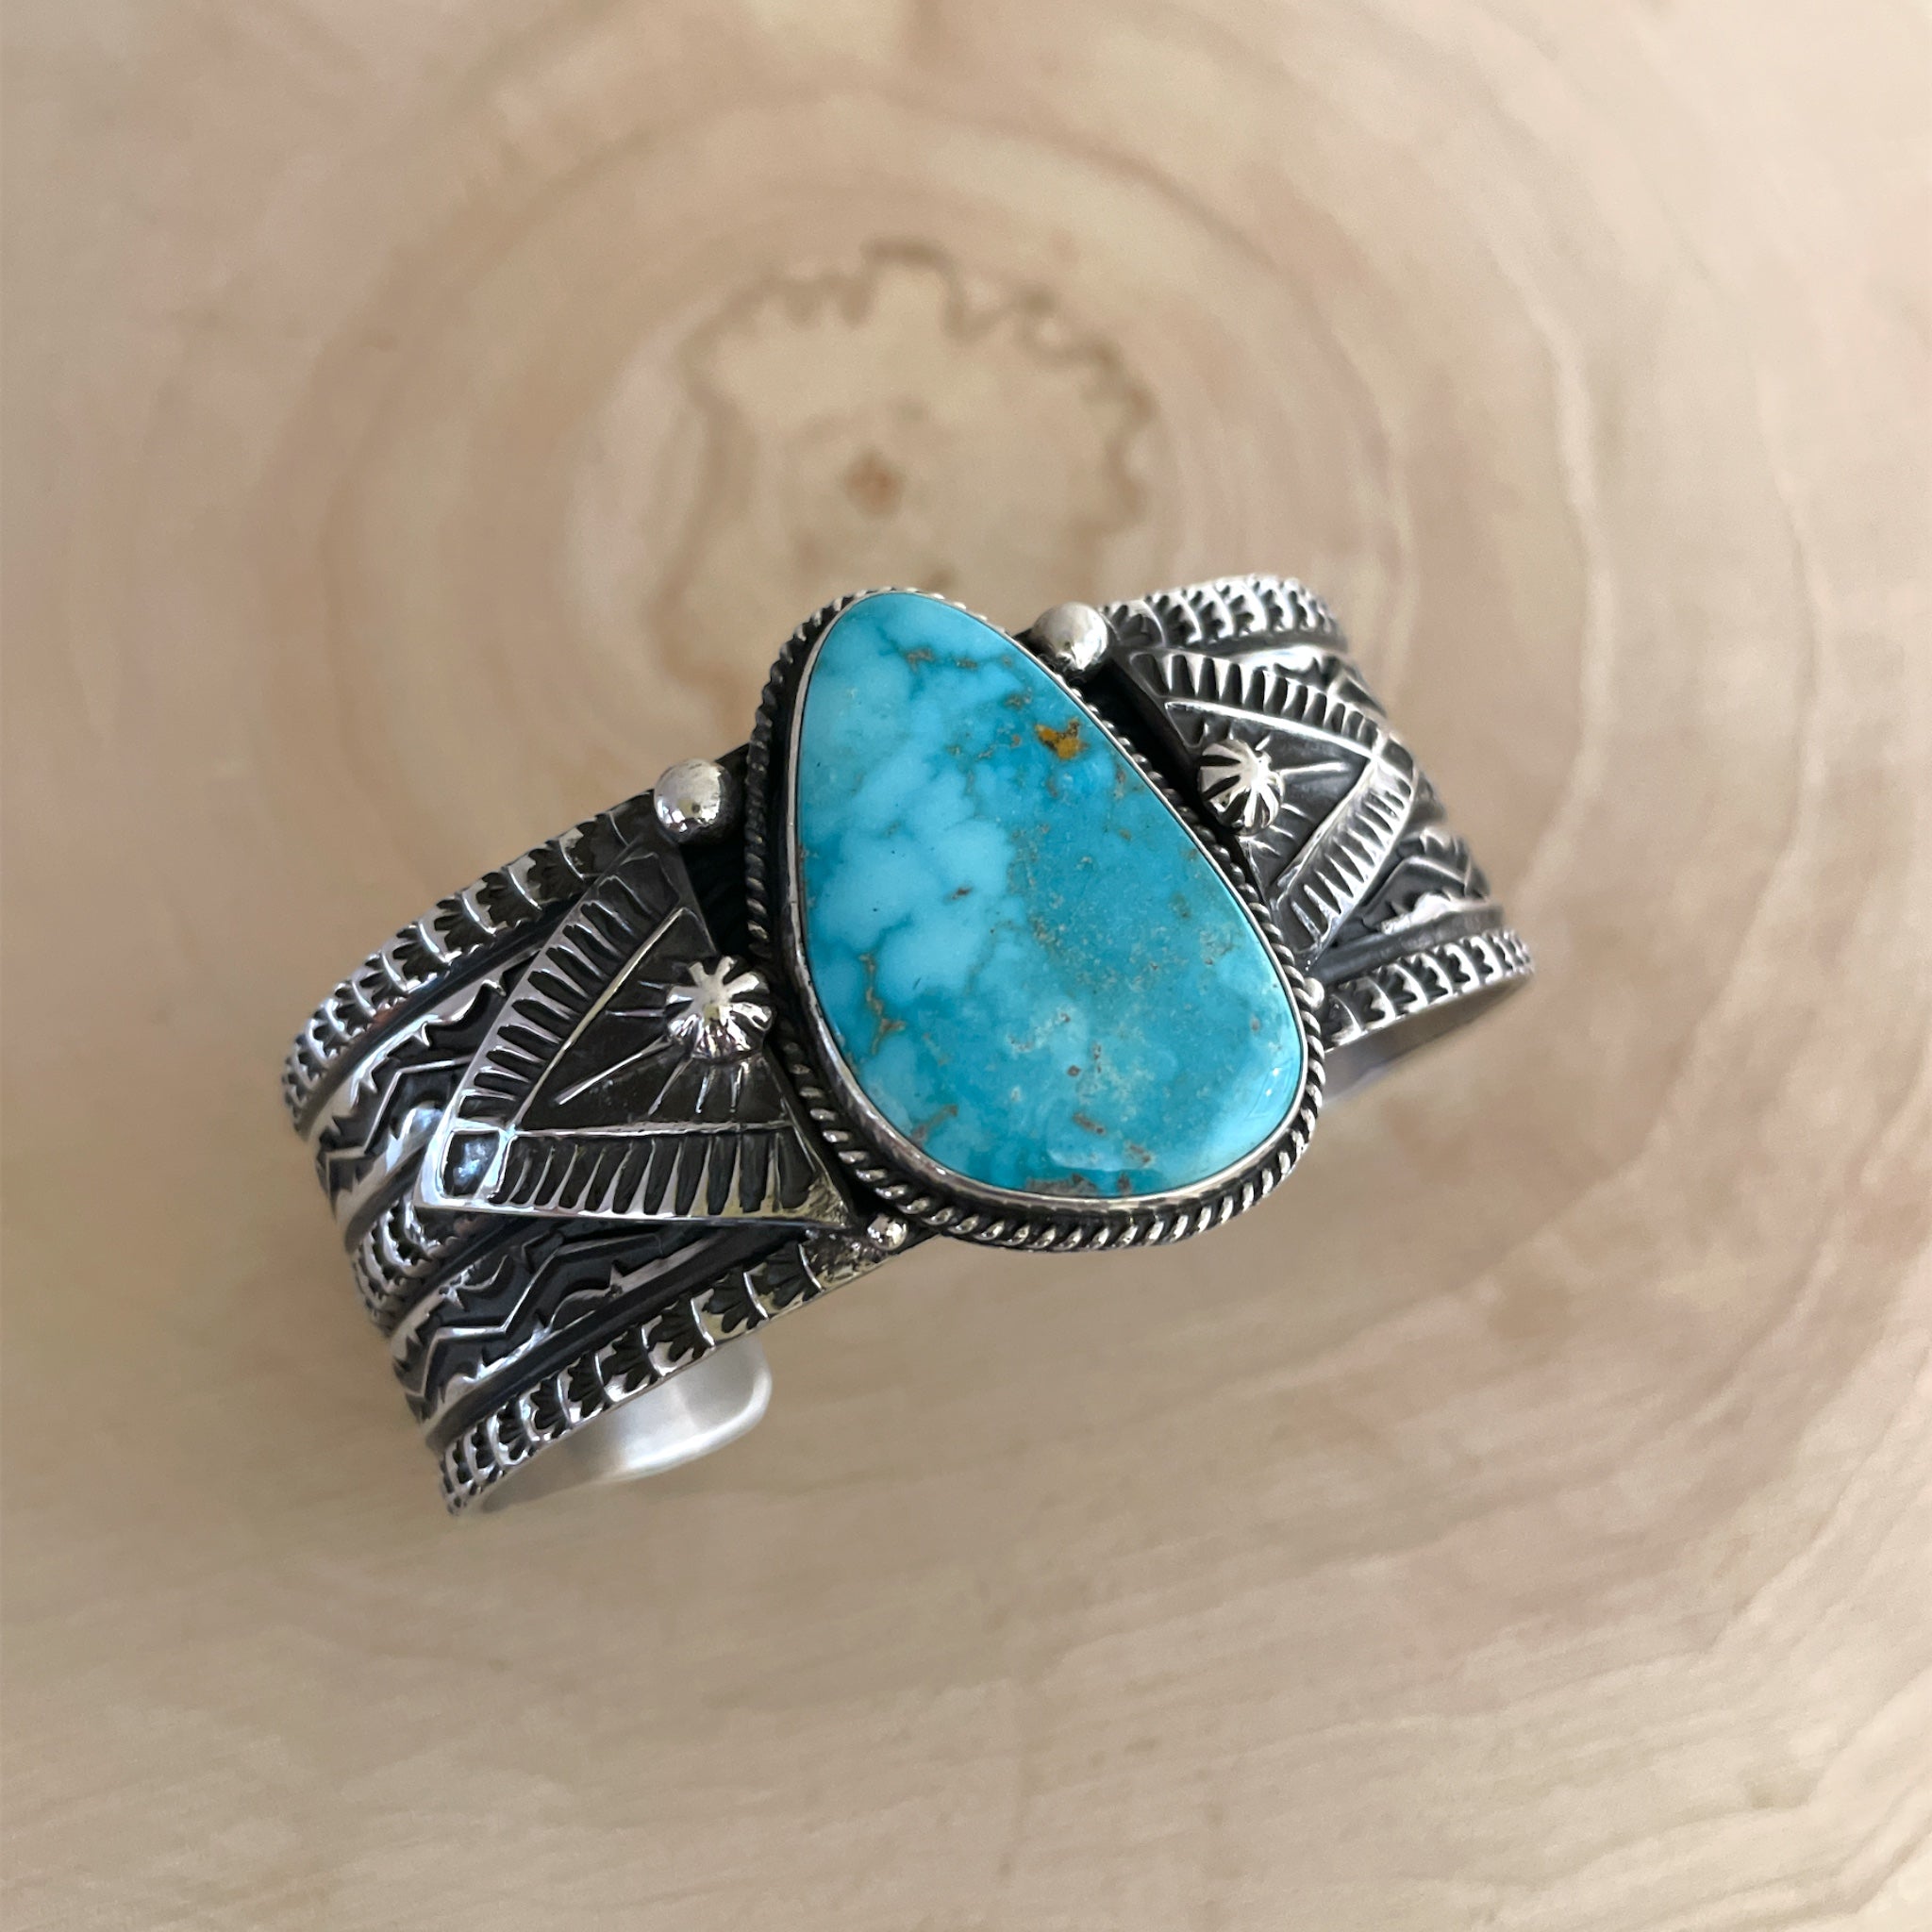 Stamped Kingman Turquoise Cuff Bracelet By Sunshine Reeves 5.35